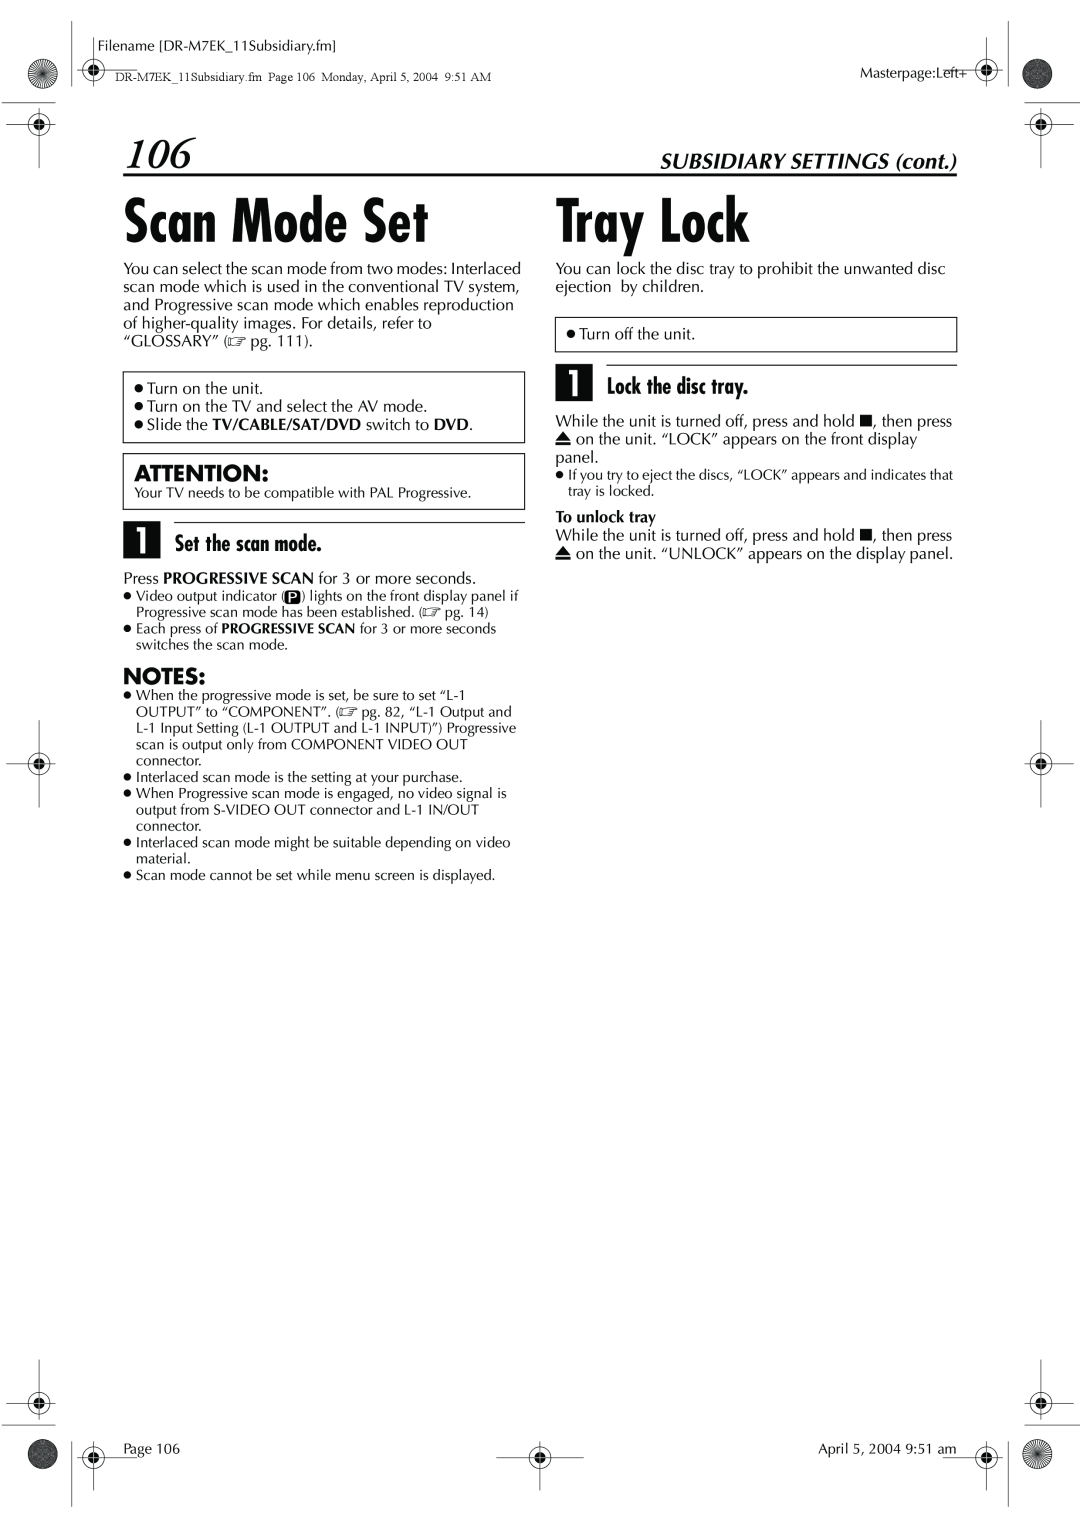 JVC DR-M7S Scan Mode Set, Tray Lock, A Set the scan mode, A Lock the disc tray, SUBSIDIARY SETTINGS cont, To unlock tray 